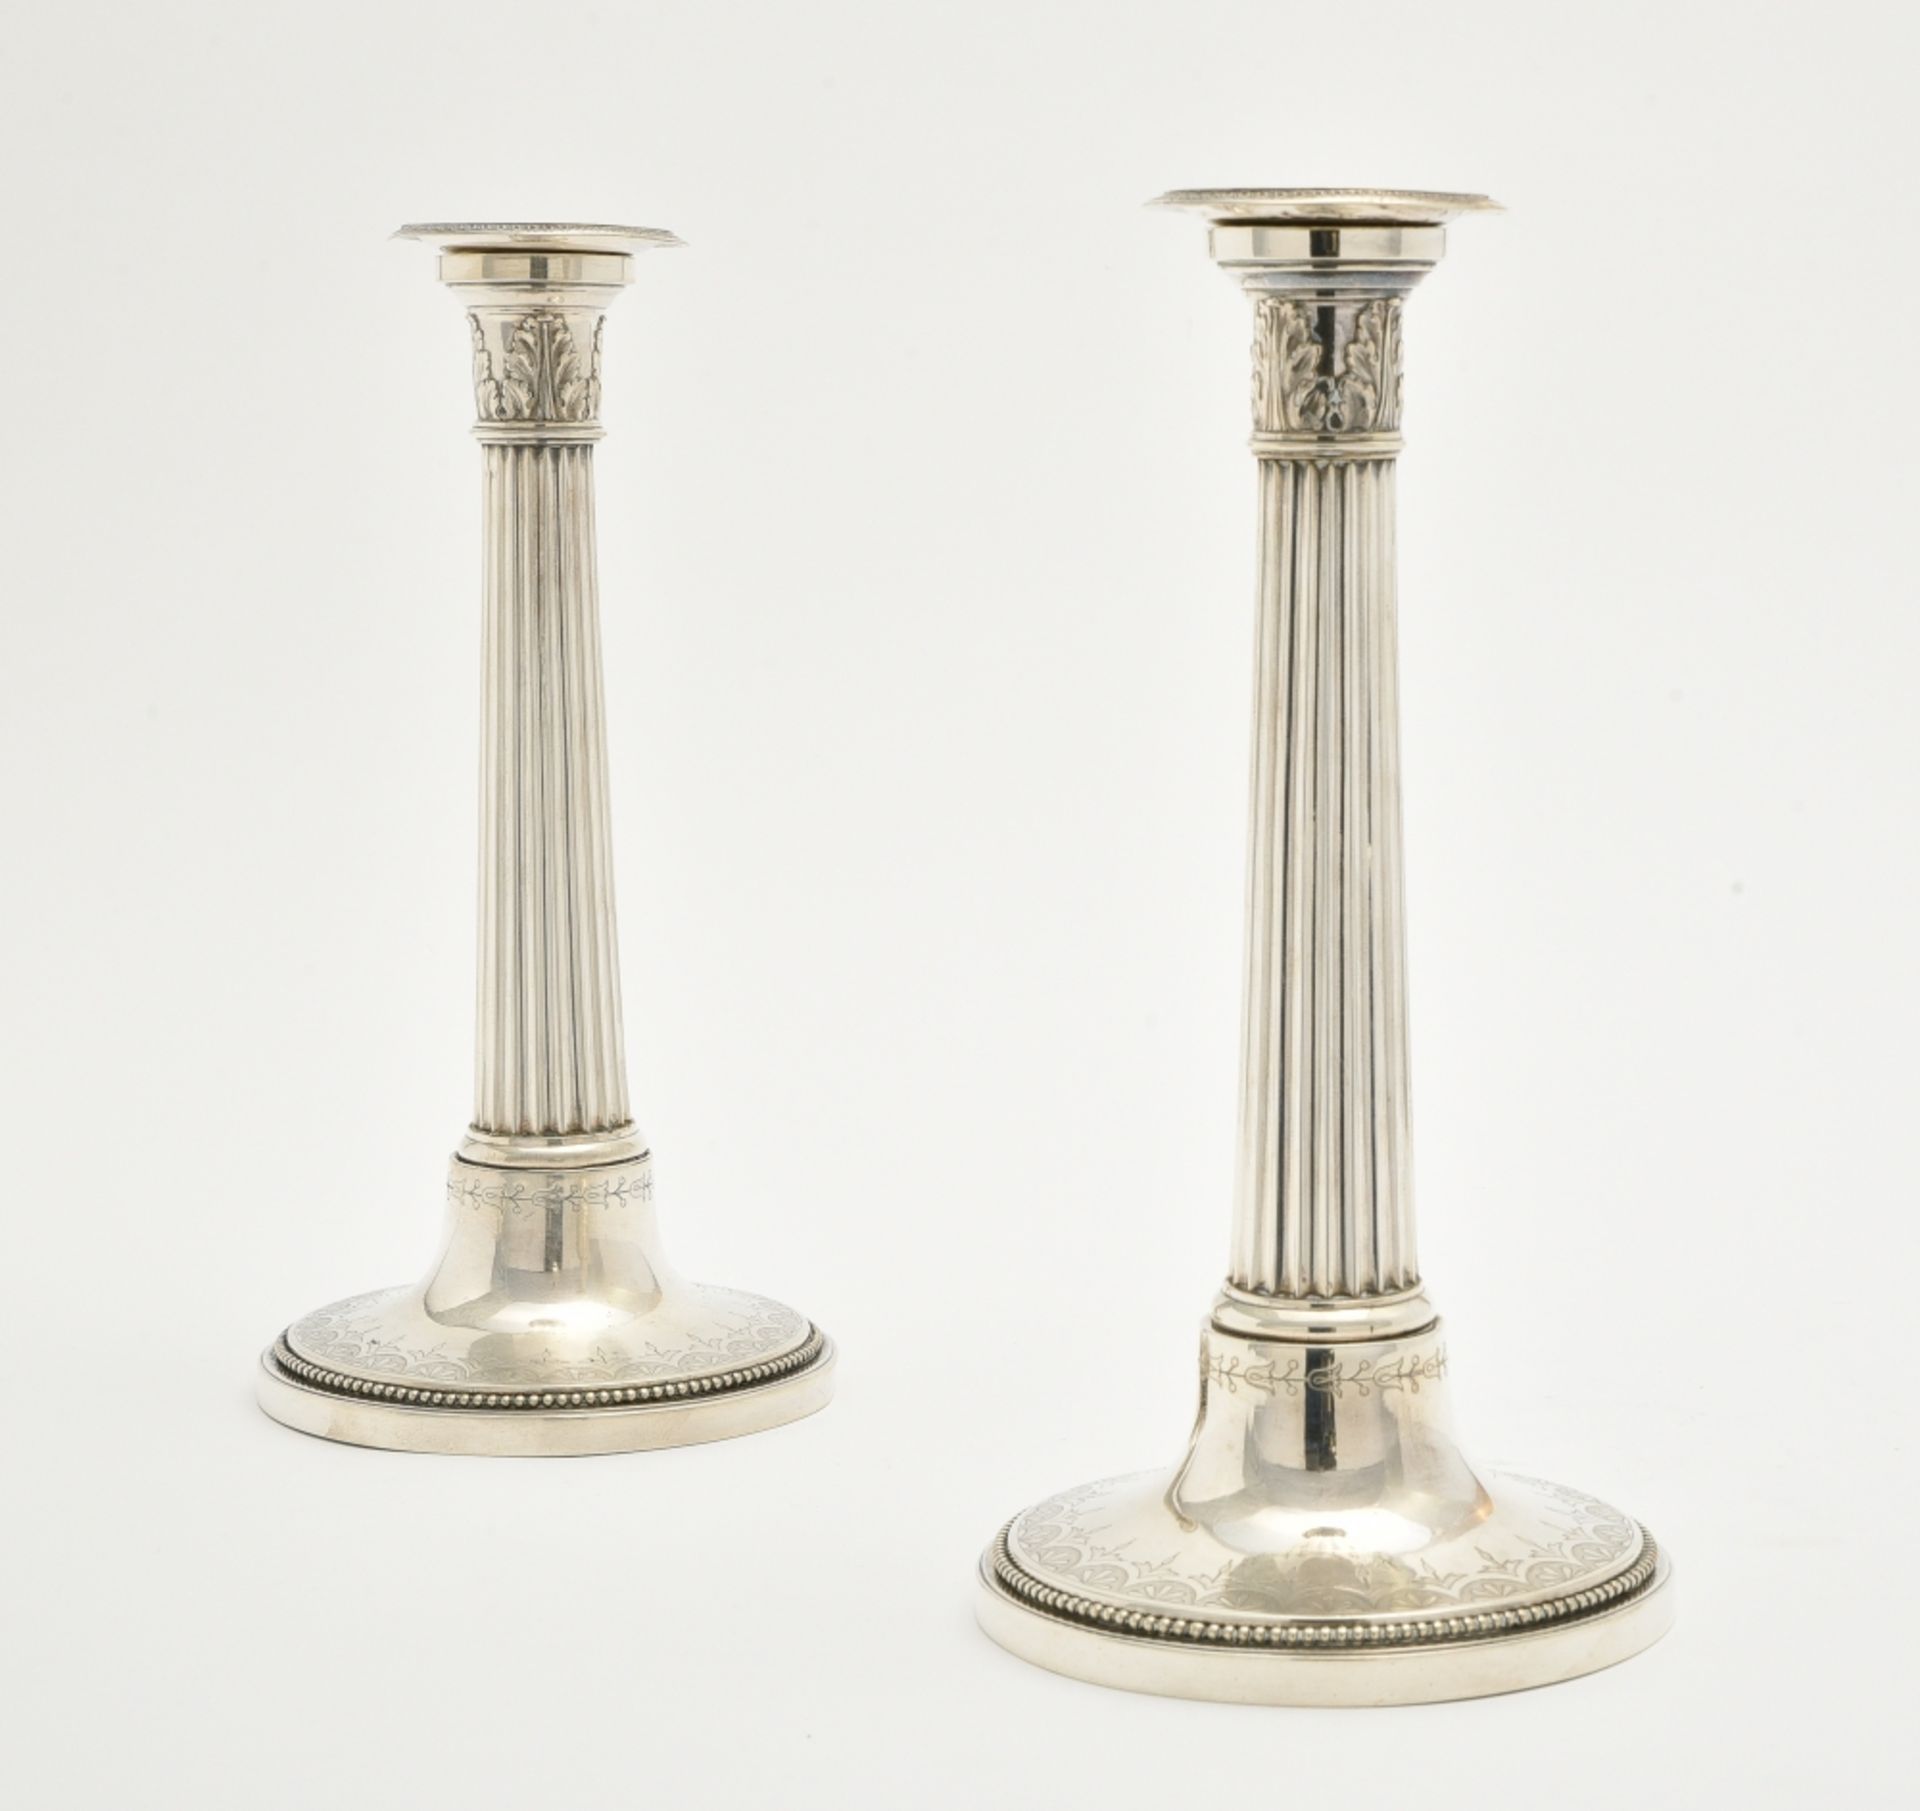 Pair of torches FRANCE, EARLY 19TH CENTURY silver, with ribbed shaft, hallmarks: rooster, 2nd title, - Image 3 of 6